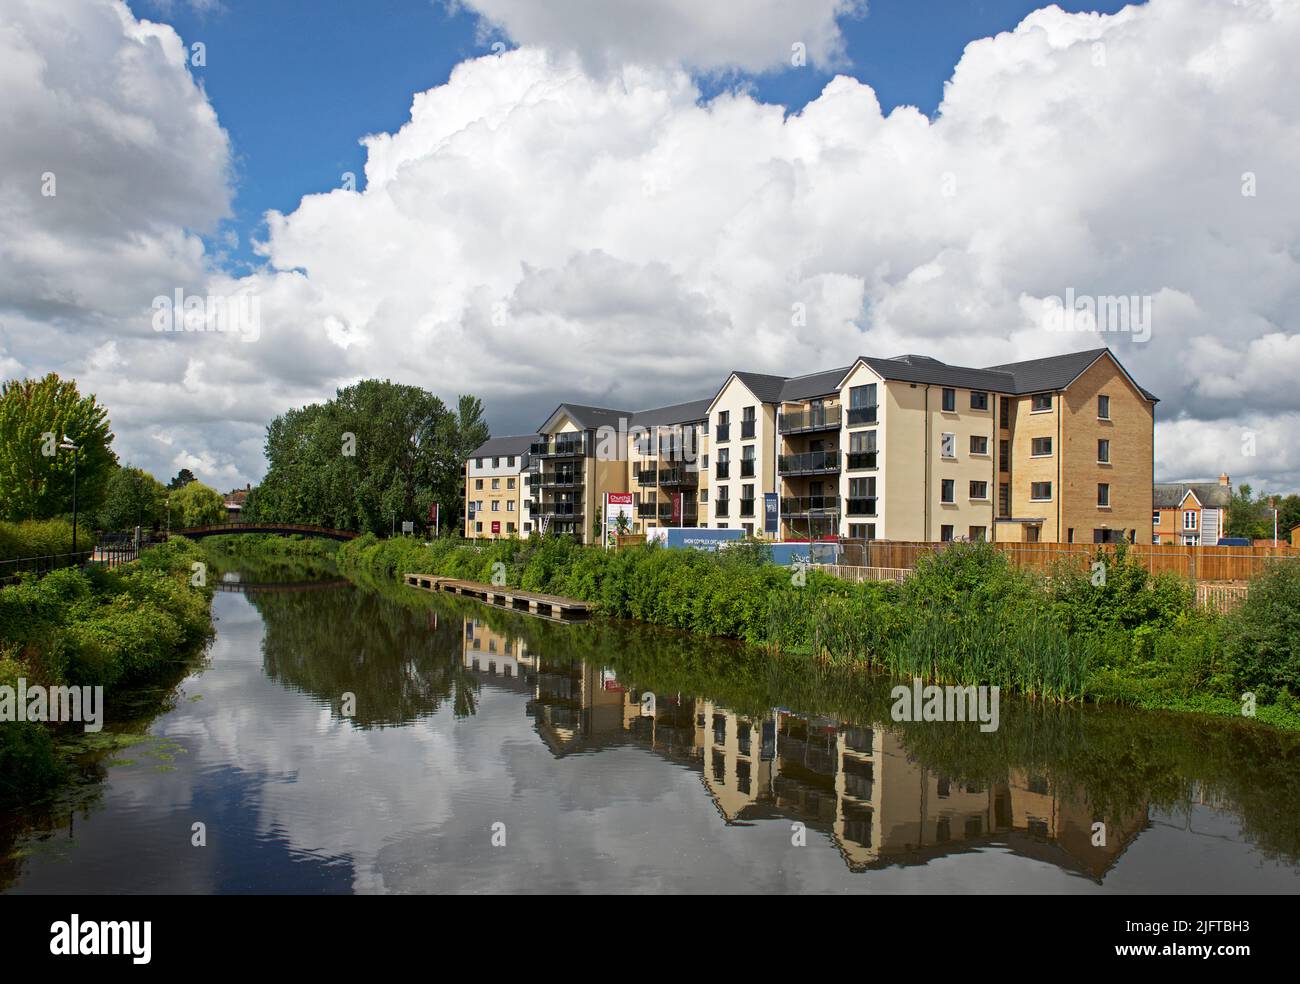 New apartments overlooking the River Tone in Taunton, Somerset, England UK Stock Photo